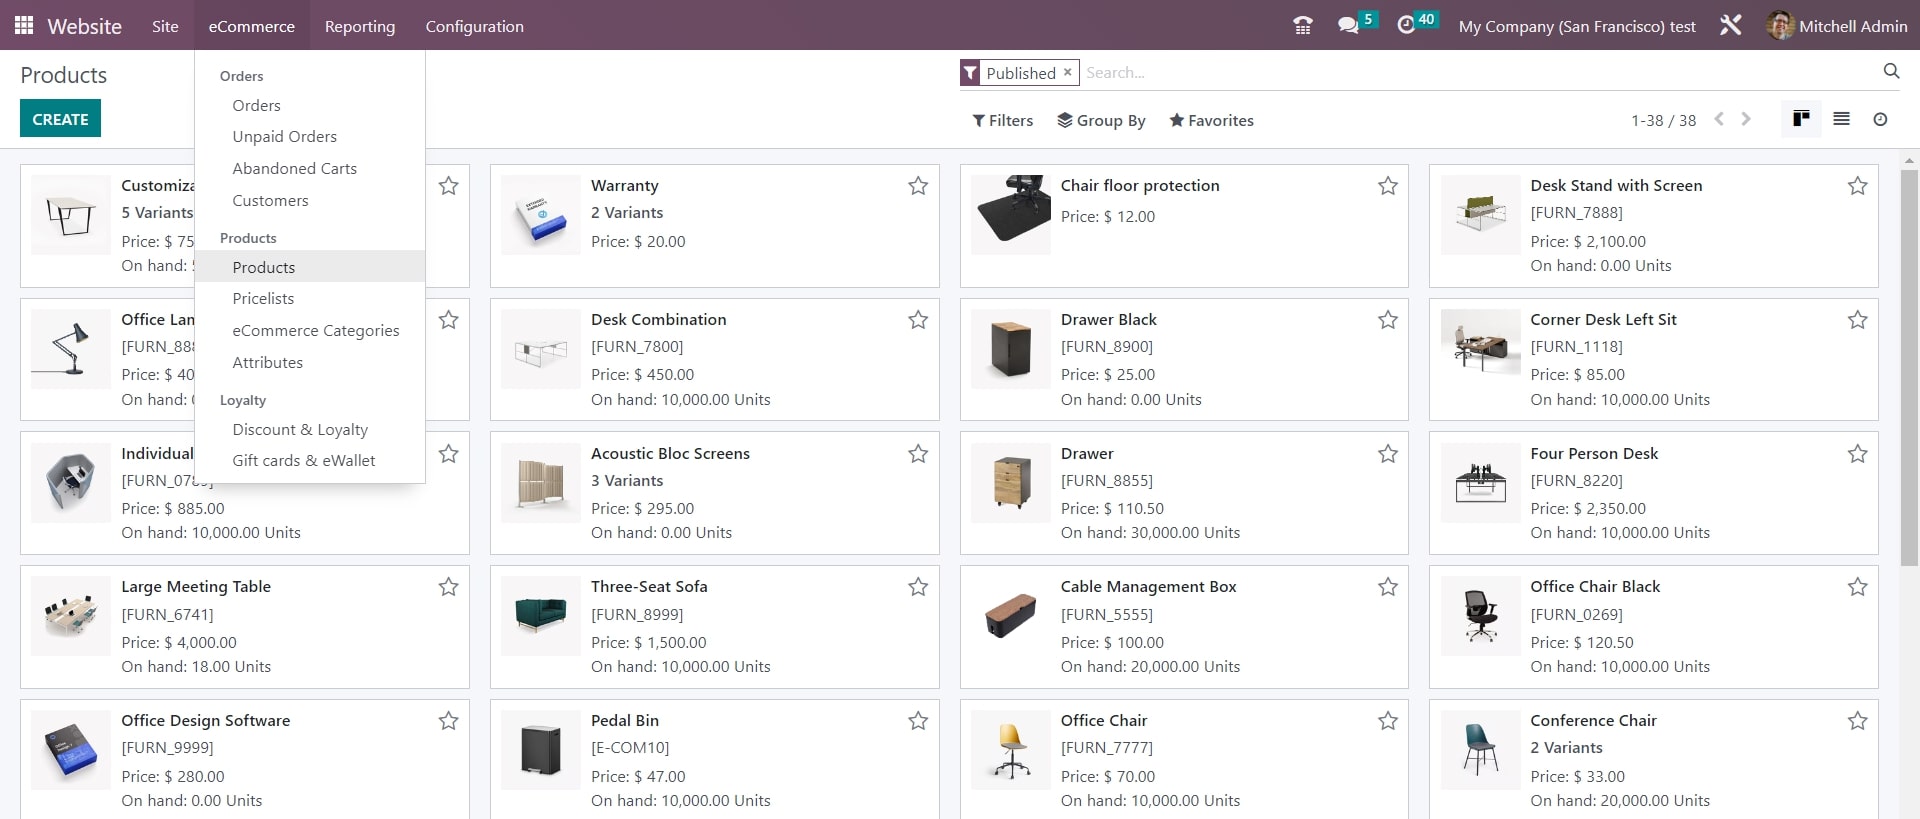 Odoo Website Module - Product View